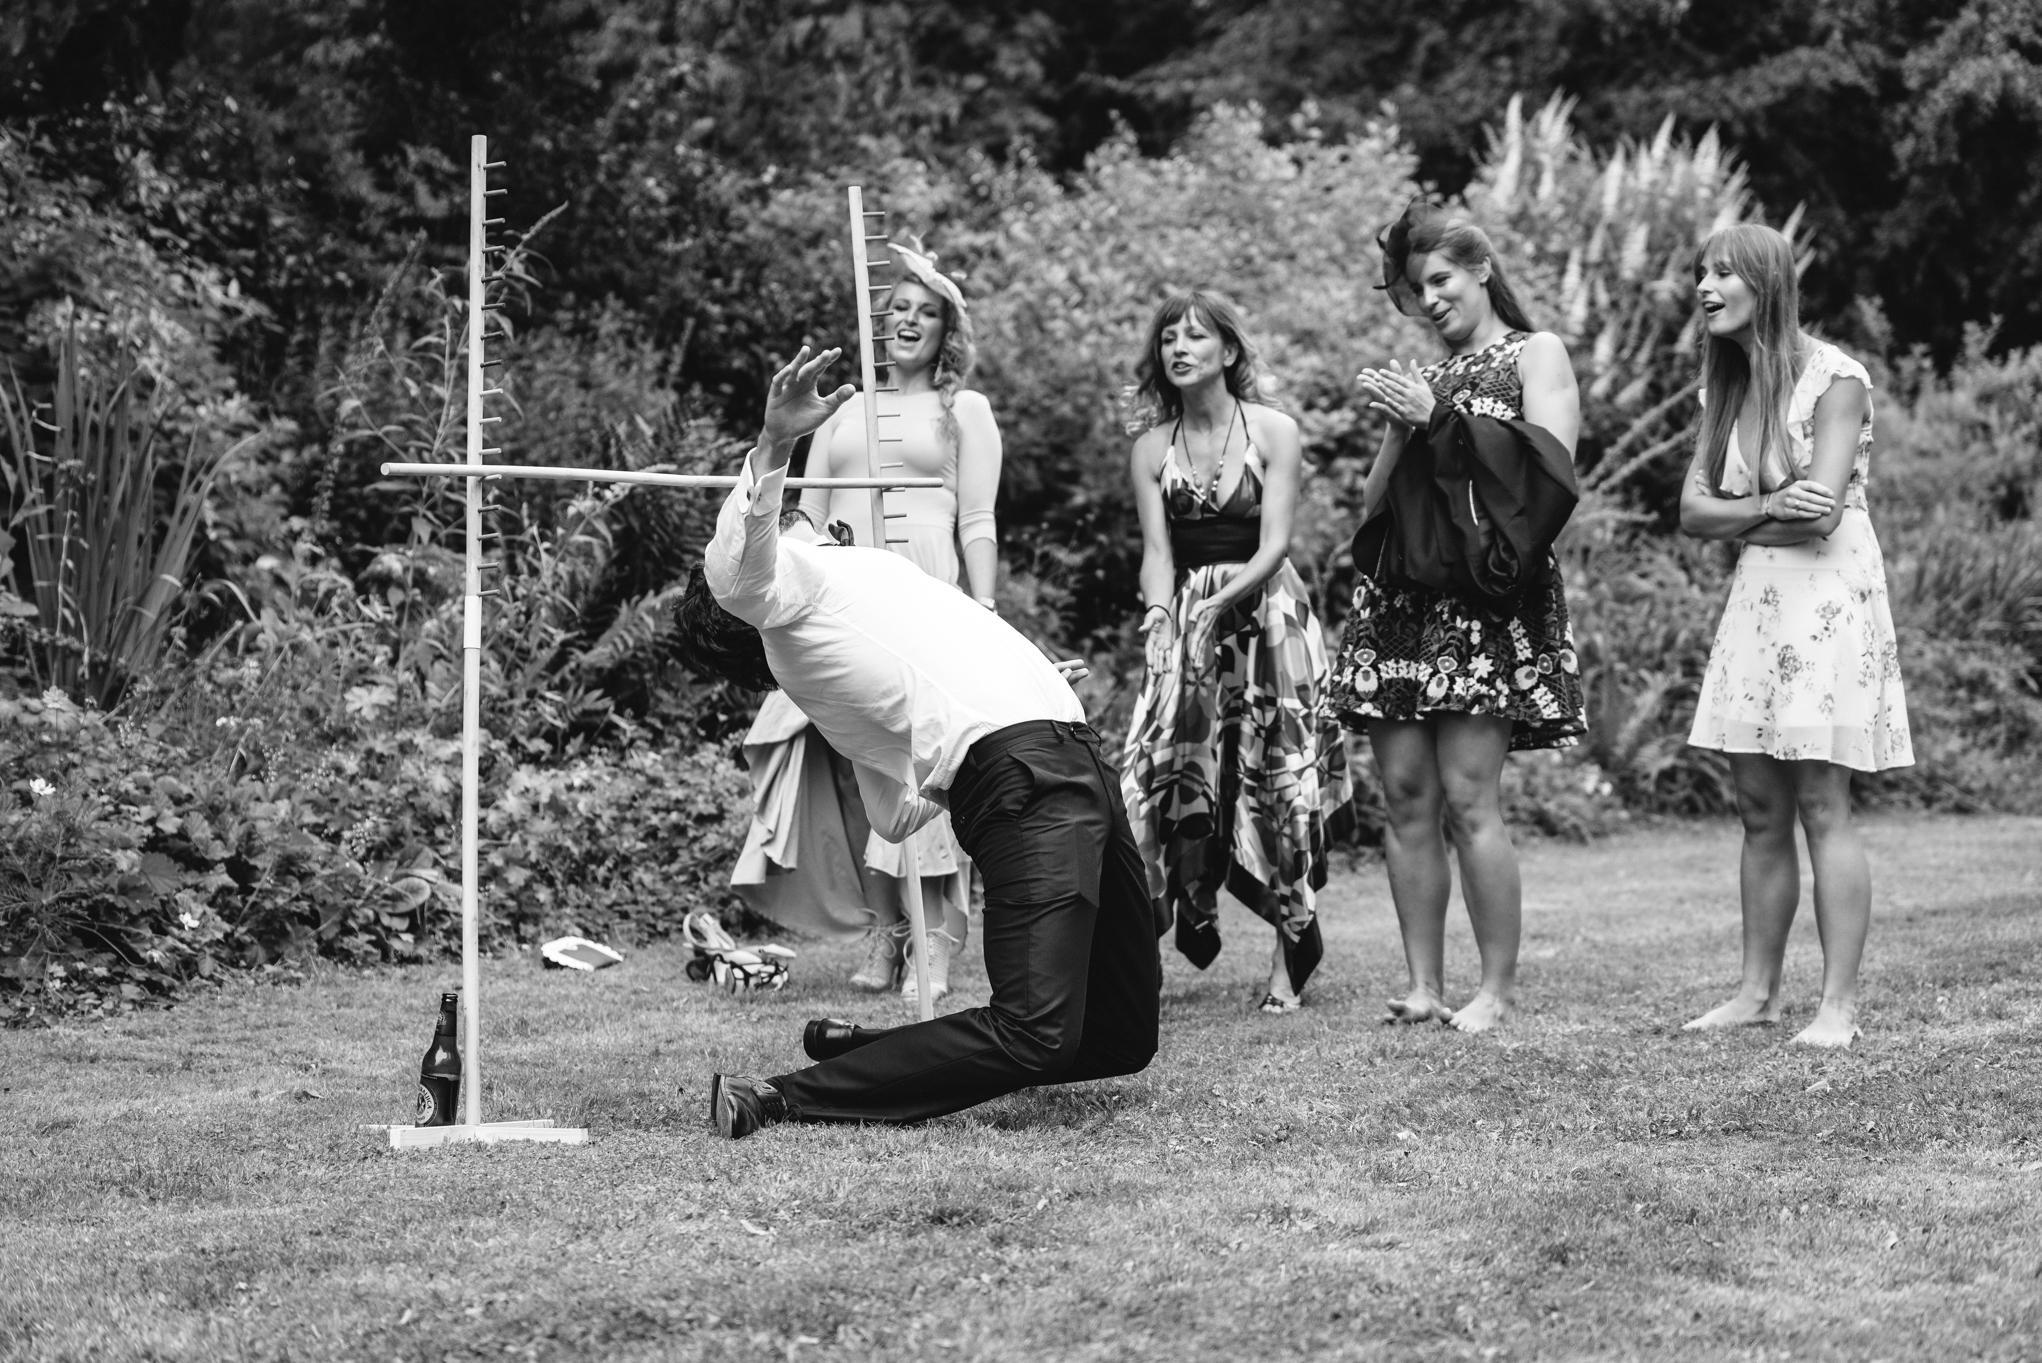 Copy of Guests doing Limbo at Wedding Reception